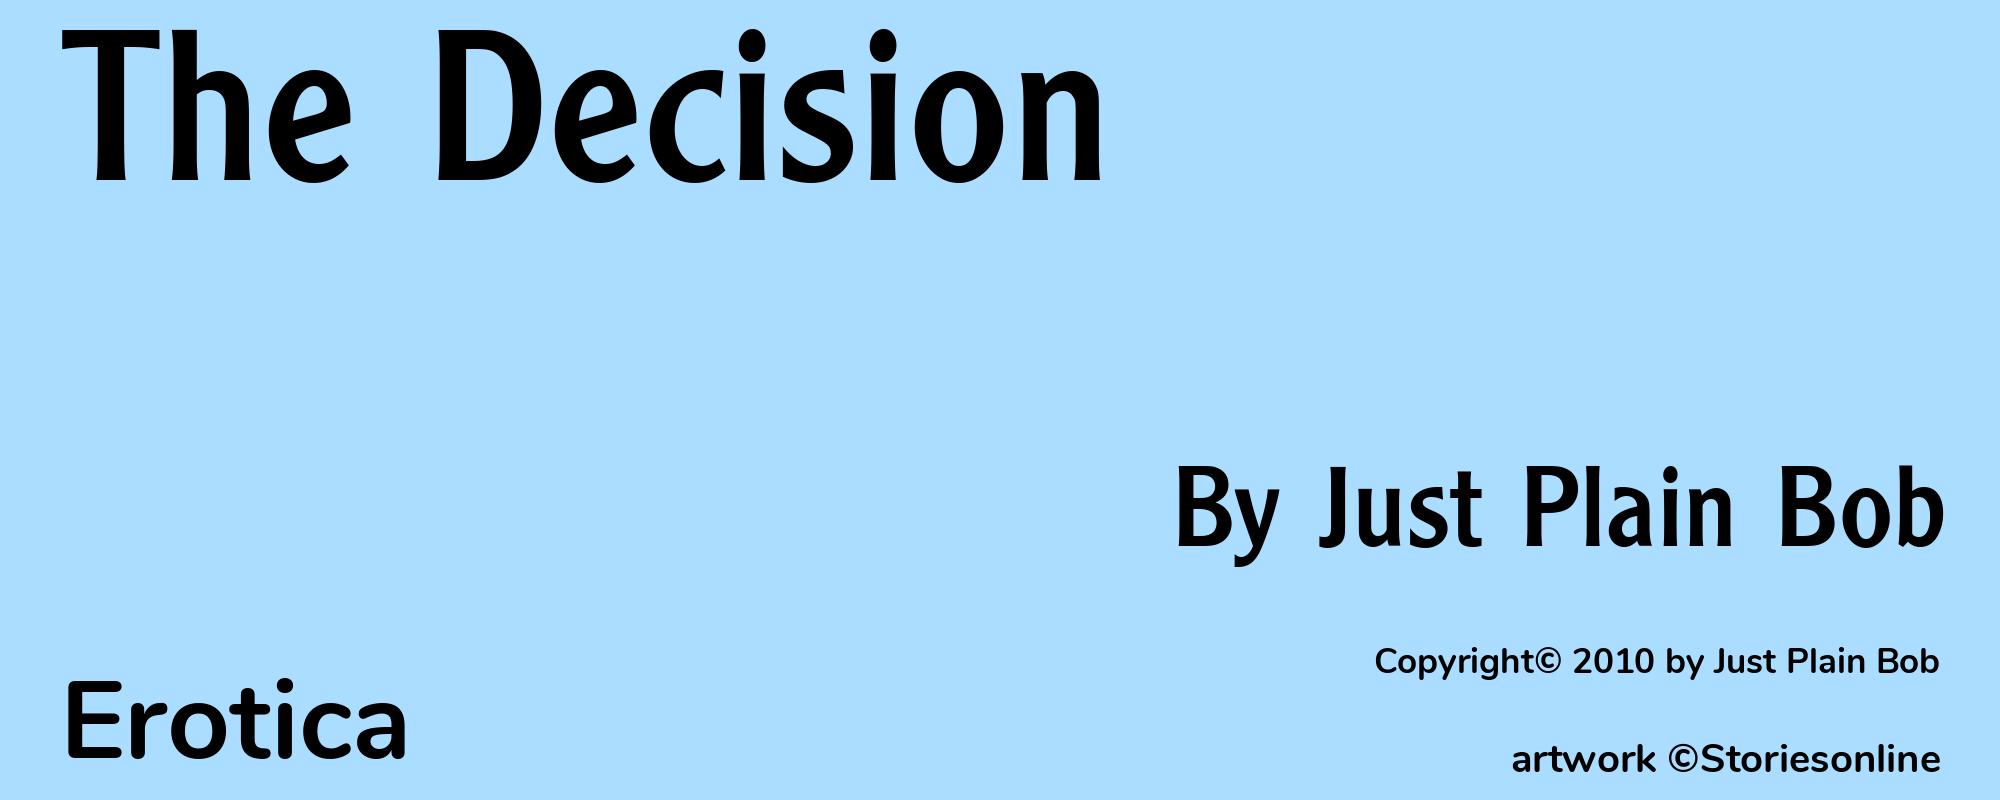 The Decision - Cover